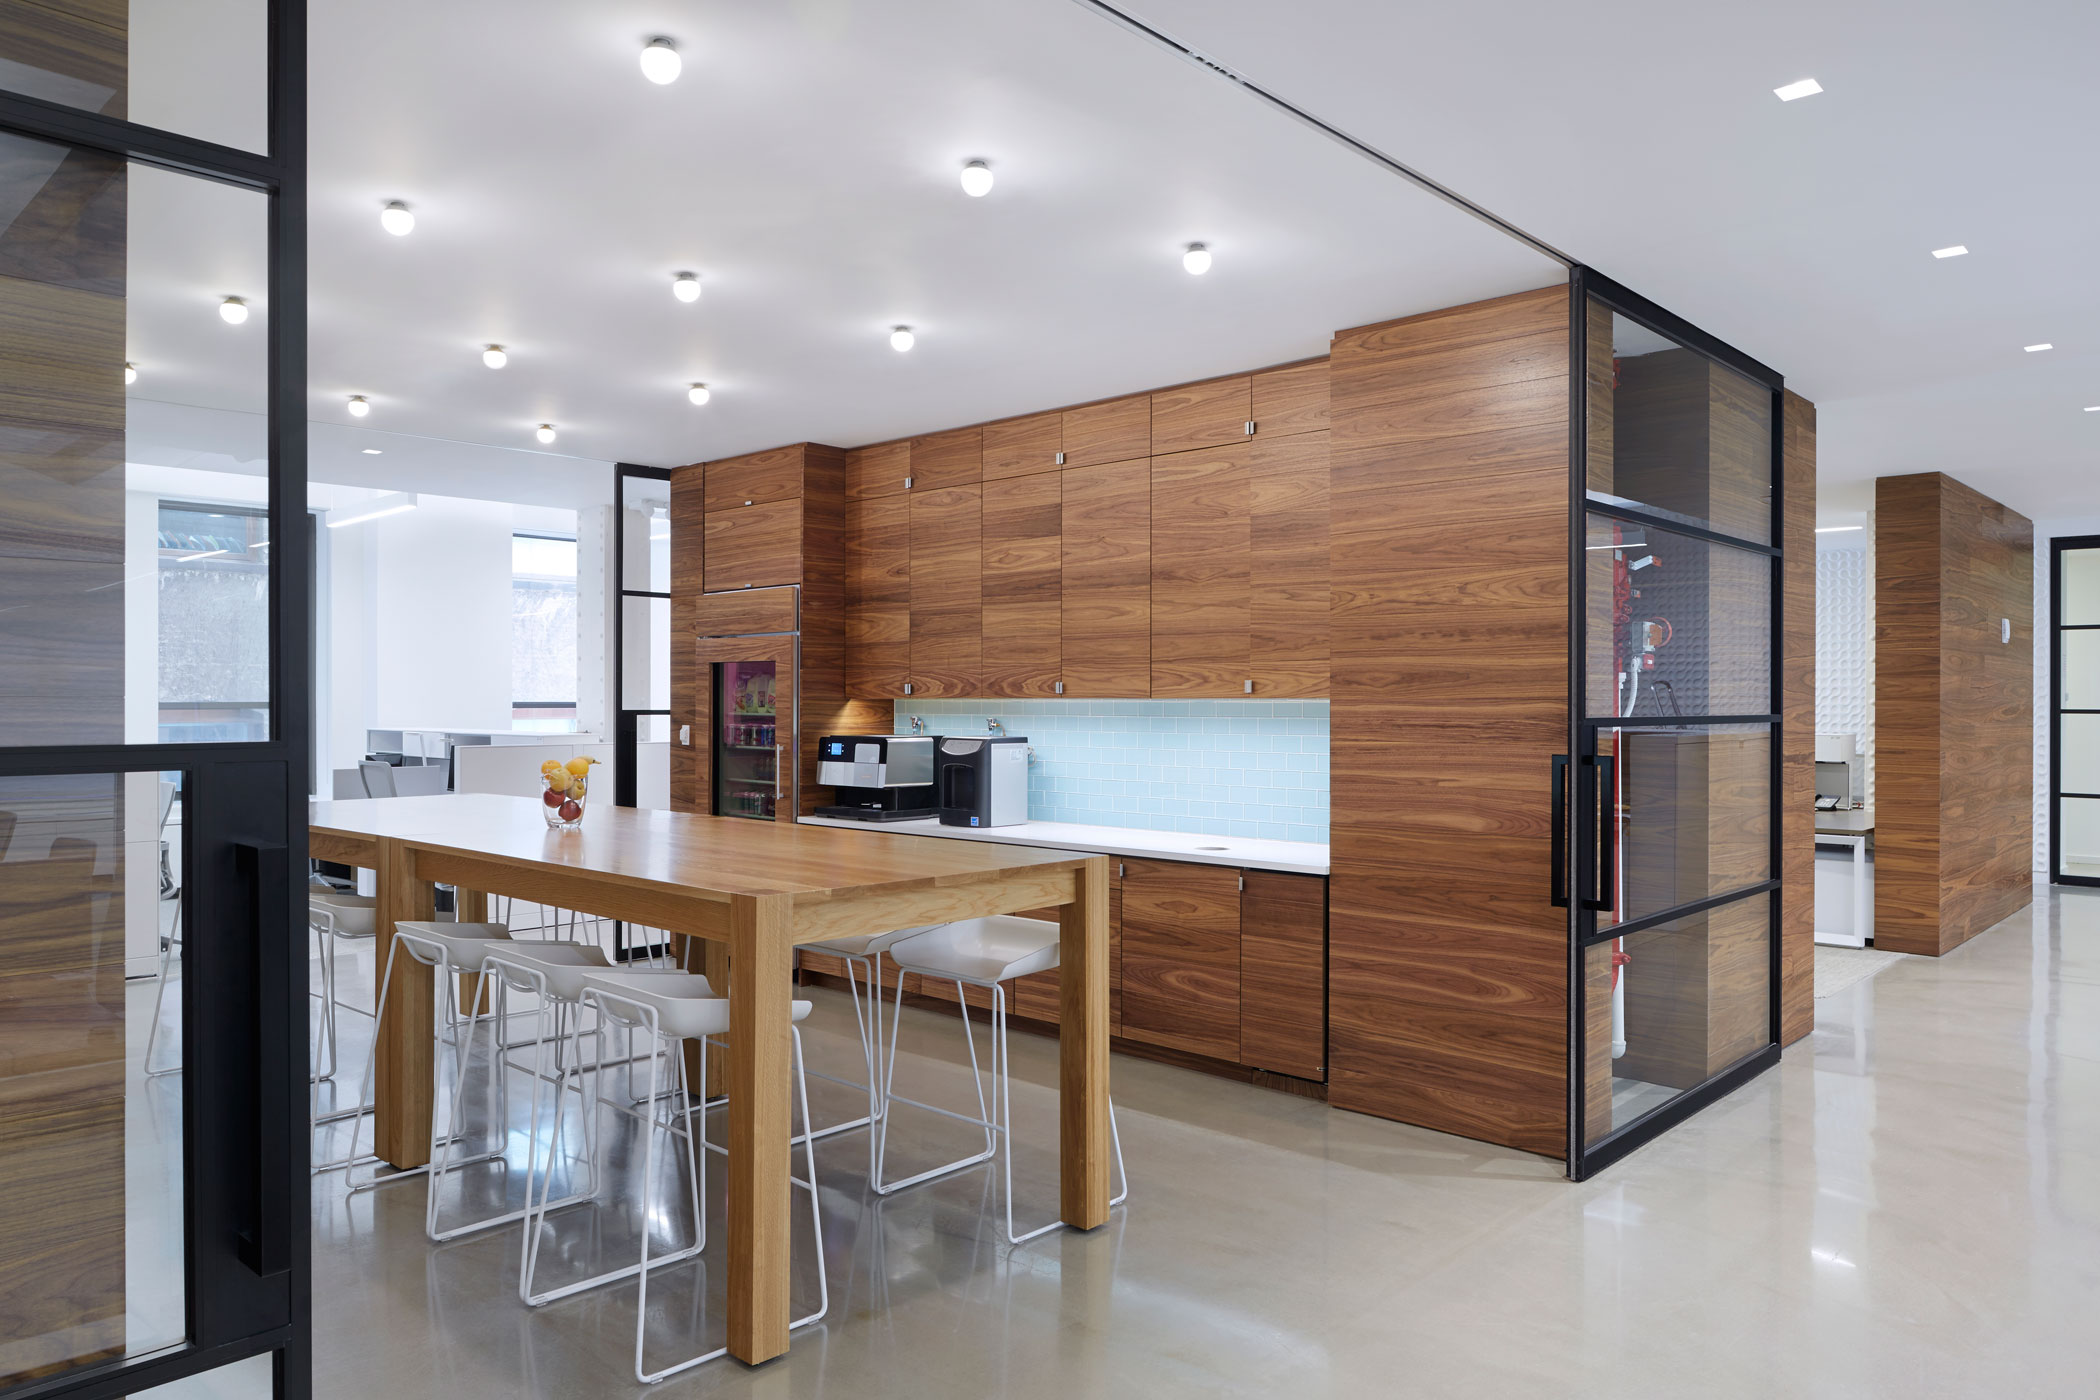 Ampersand Architecture: Acxiom Offices